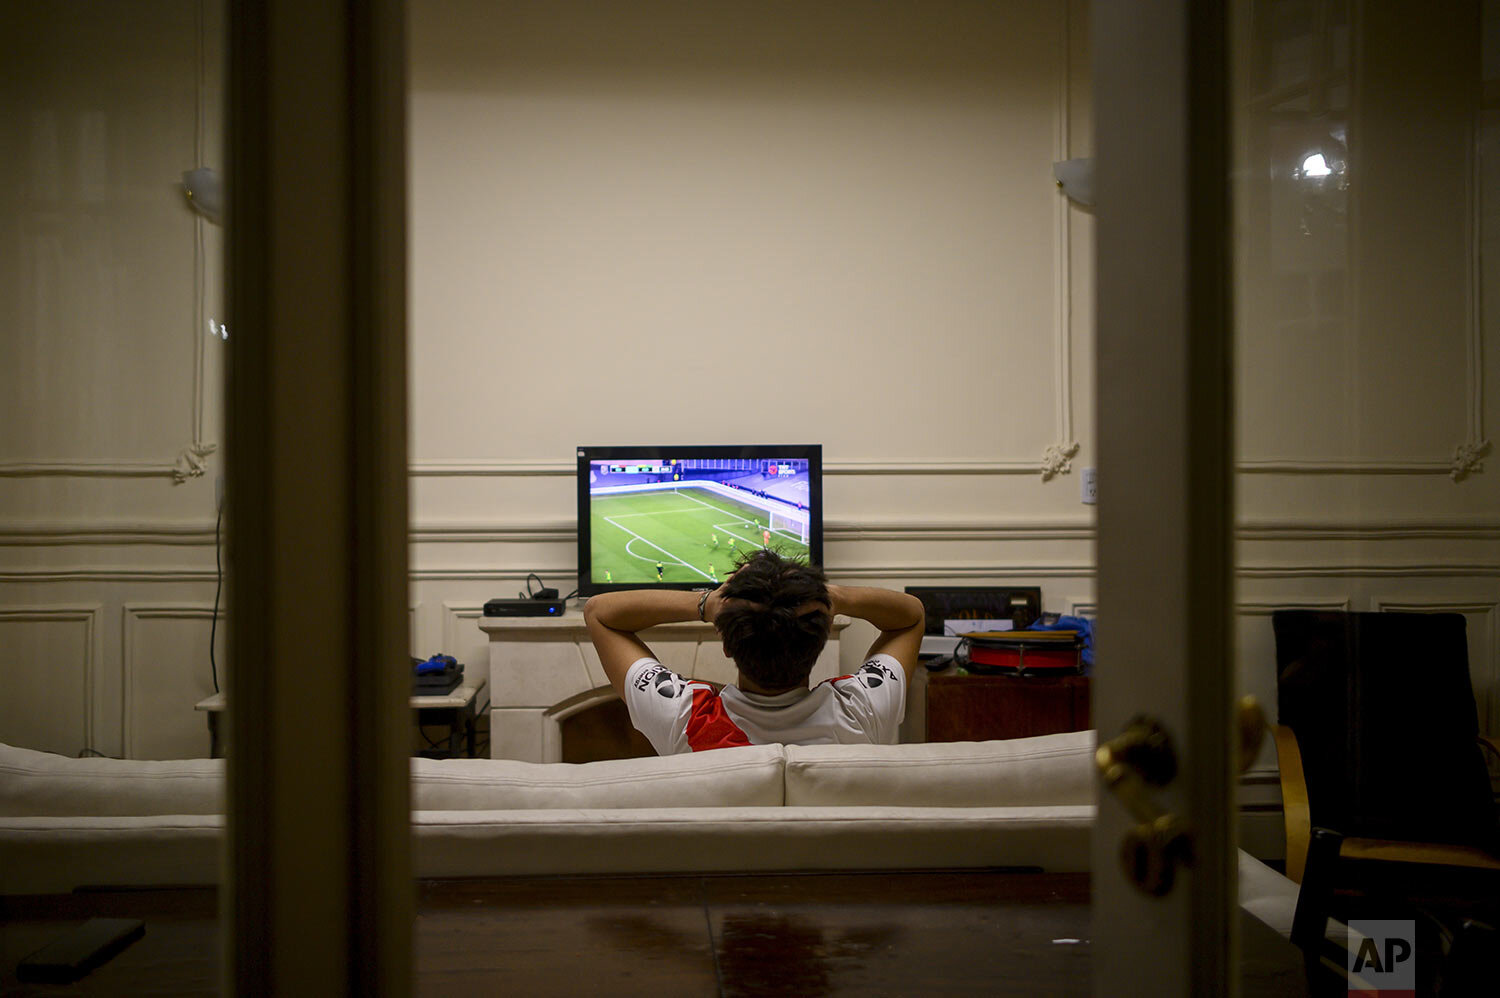  River Plate soccer fan Juan Camisassa watches his team play Club Atletico Aldosivi on television at his home during COVID-19 pandemic restrictions banning fans from stadiums in Buenos Aires, Argentina, Aug. 26, 2021. (AP Photo/Mario De Fina) 